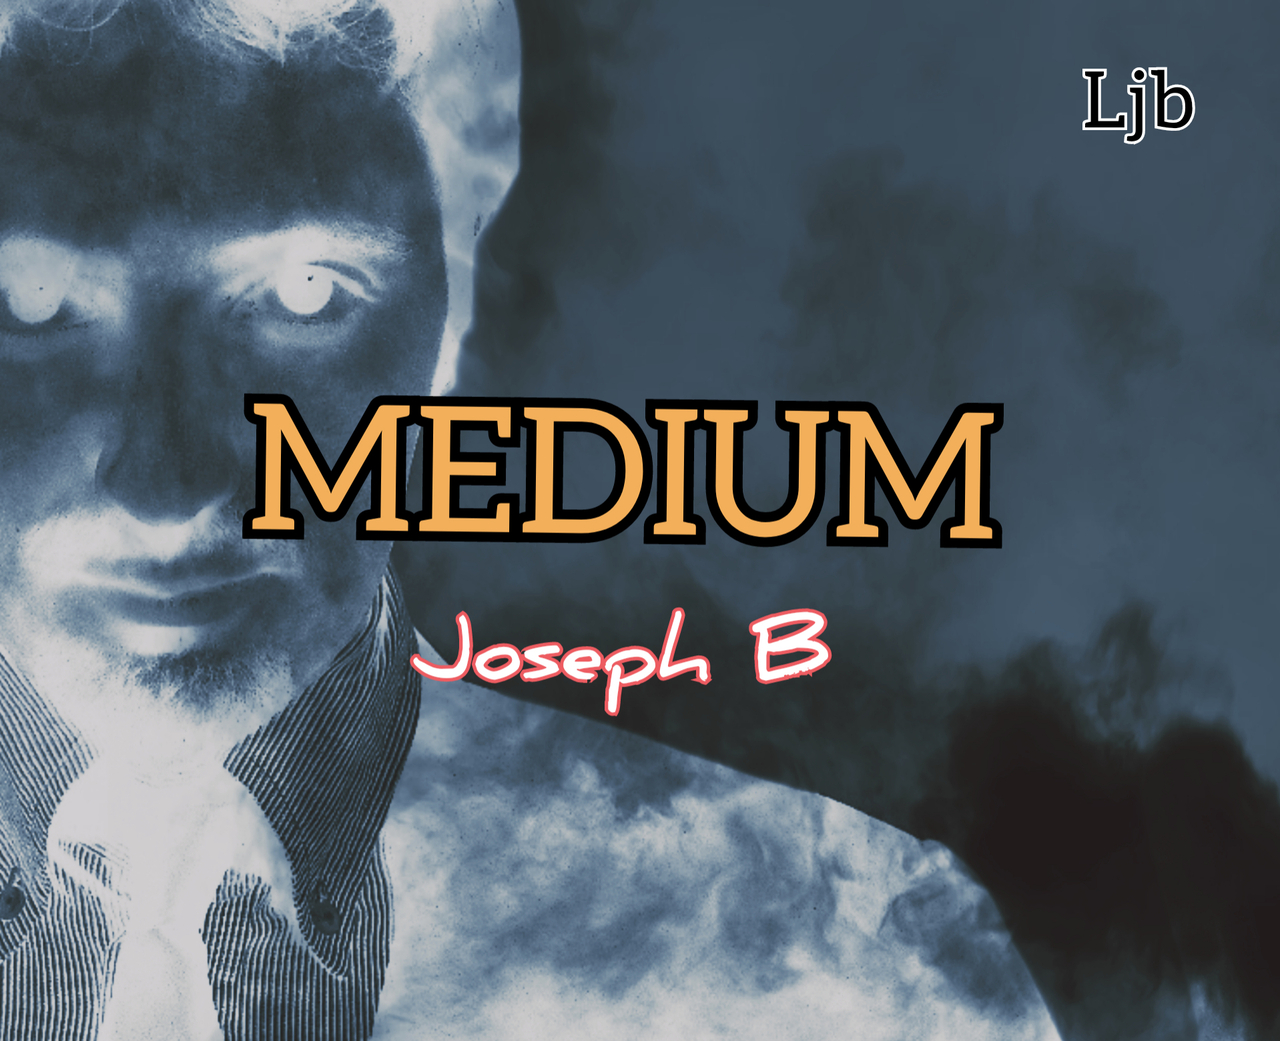 Paranormal (Or Medium) by Joseph B (MP4 Video Download)